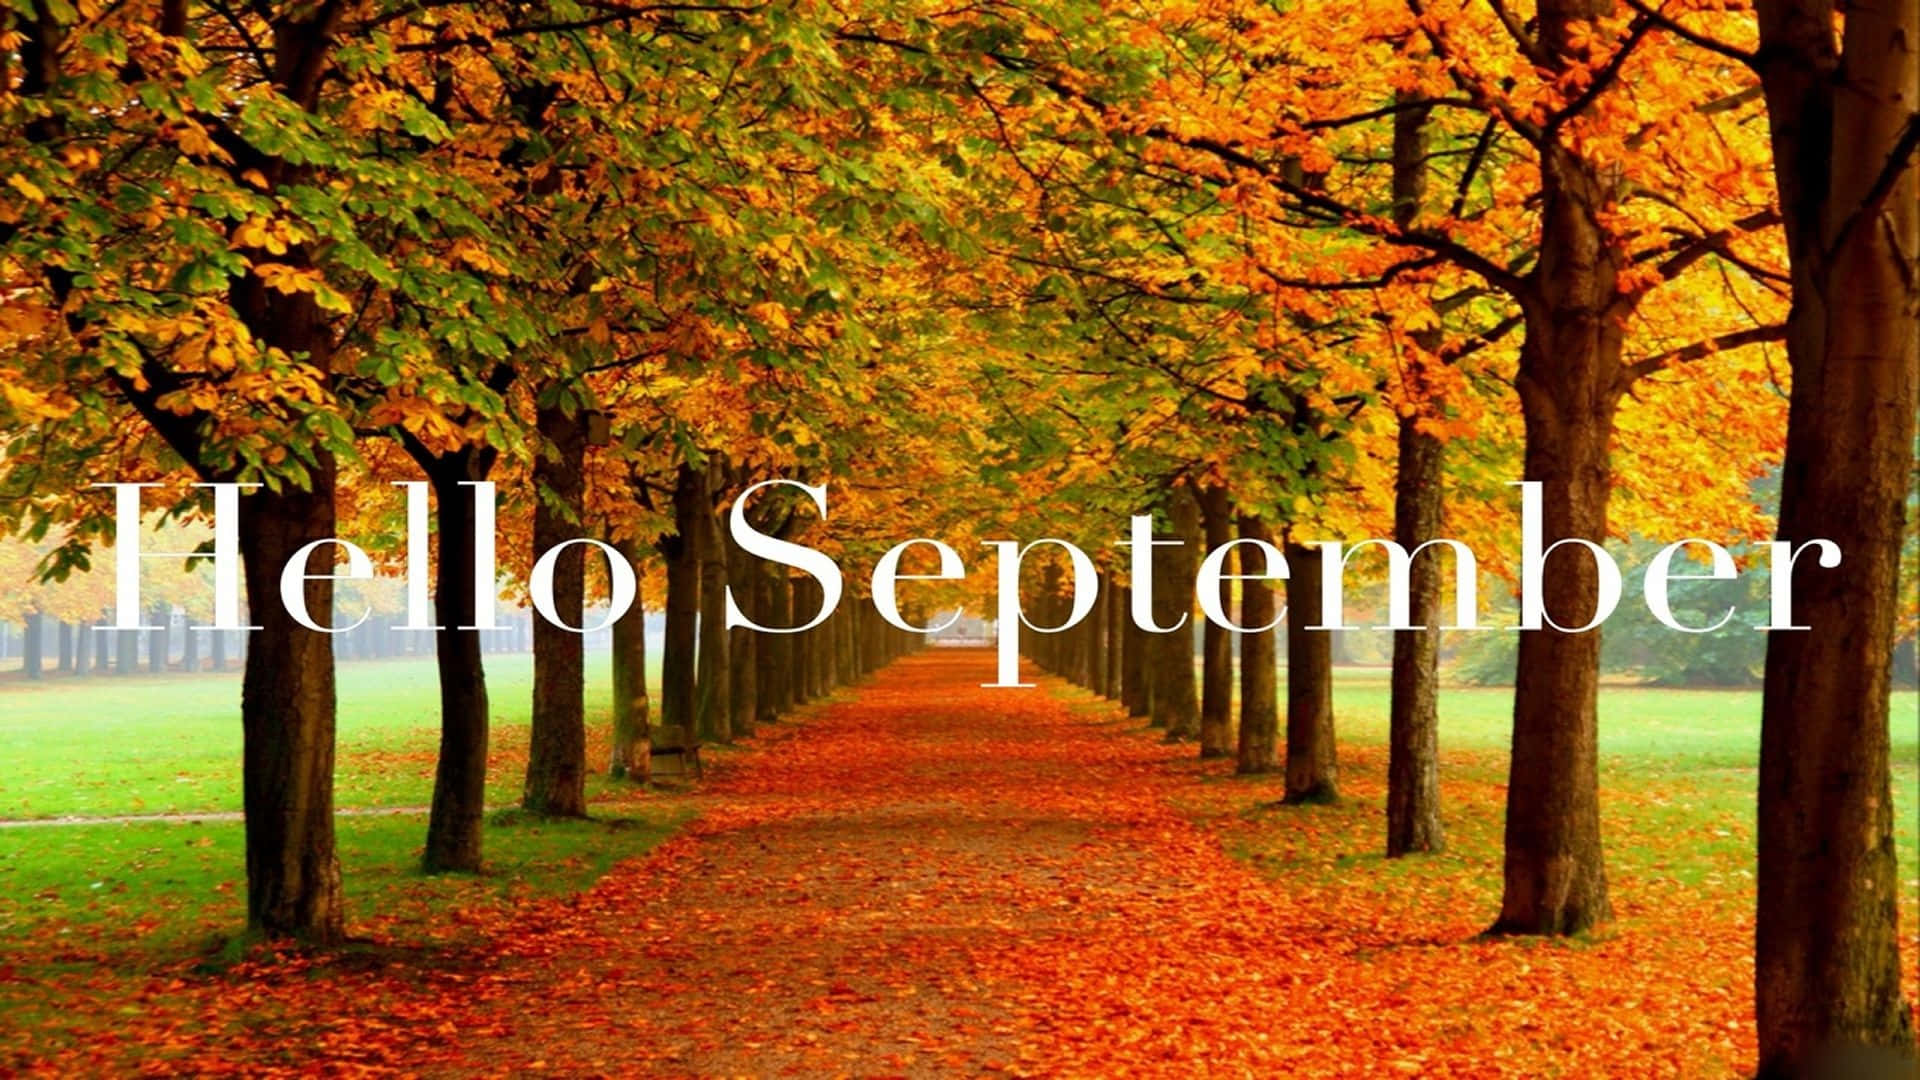 “Let's Welcome September With Open Arms!”